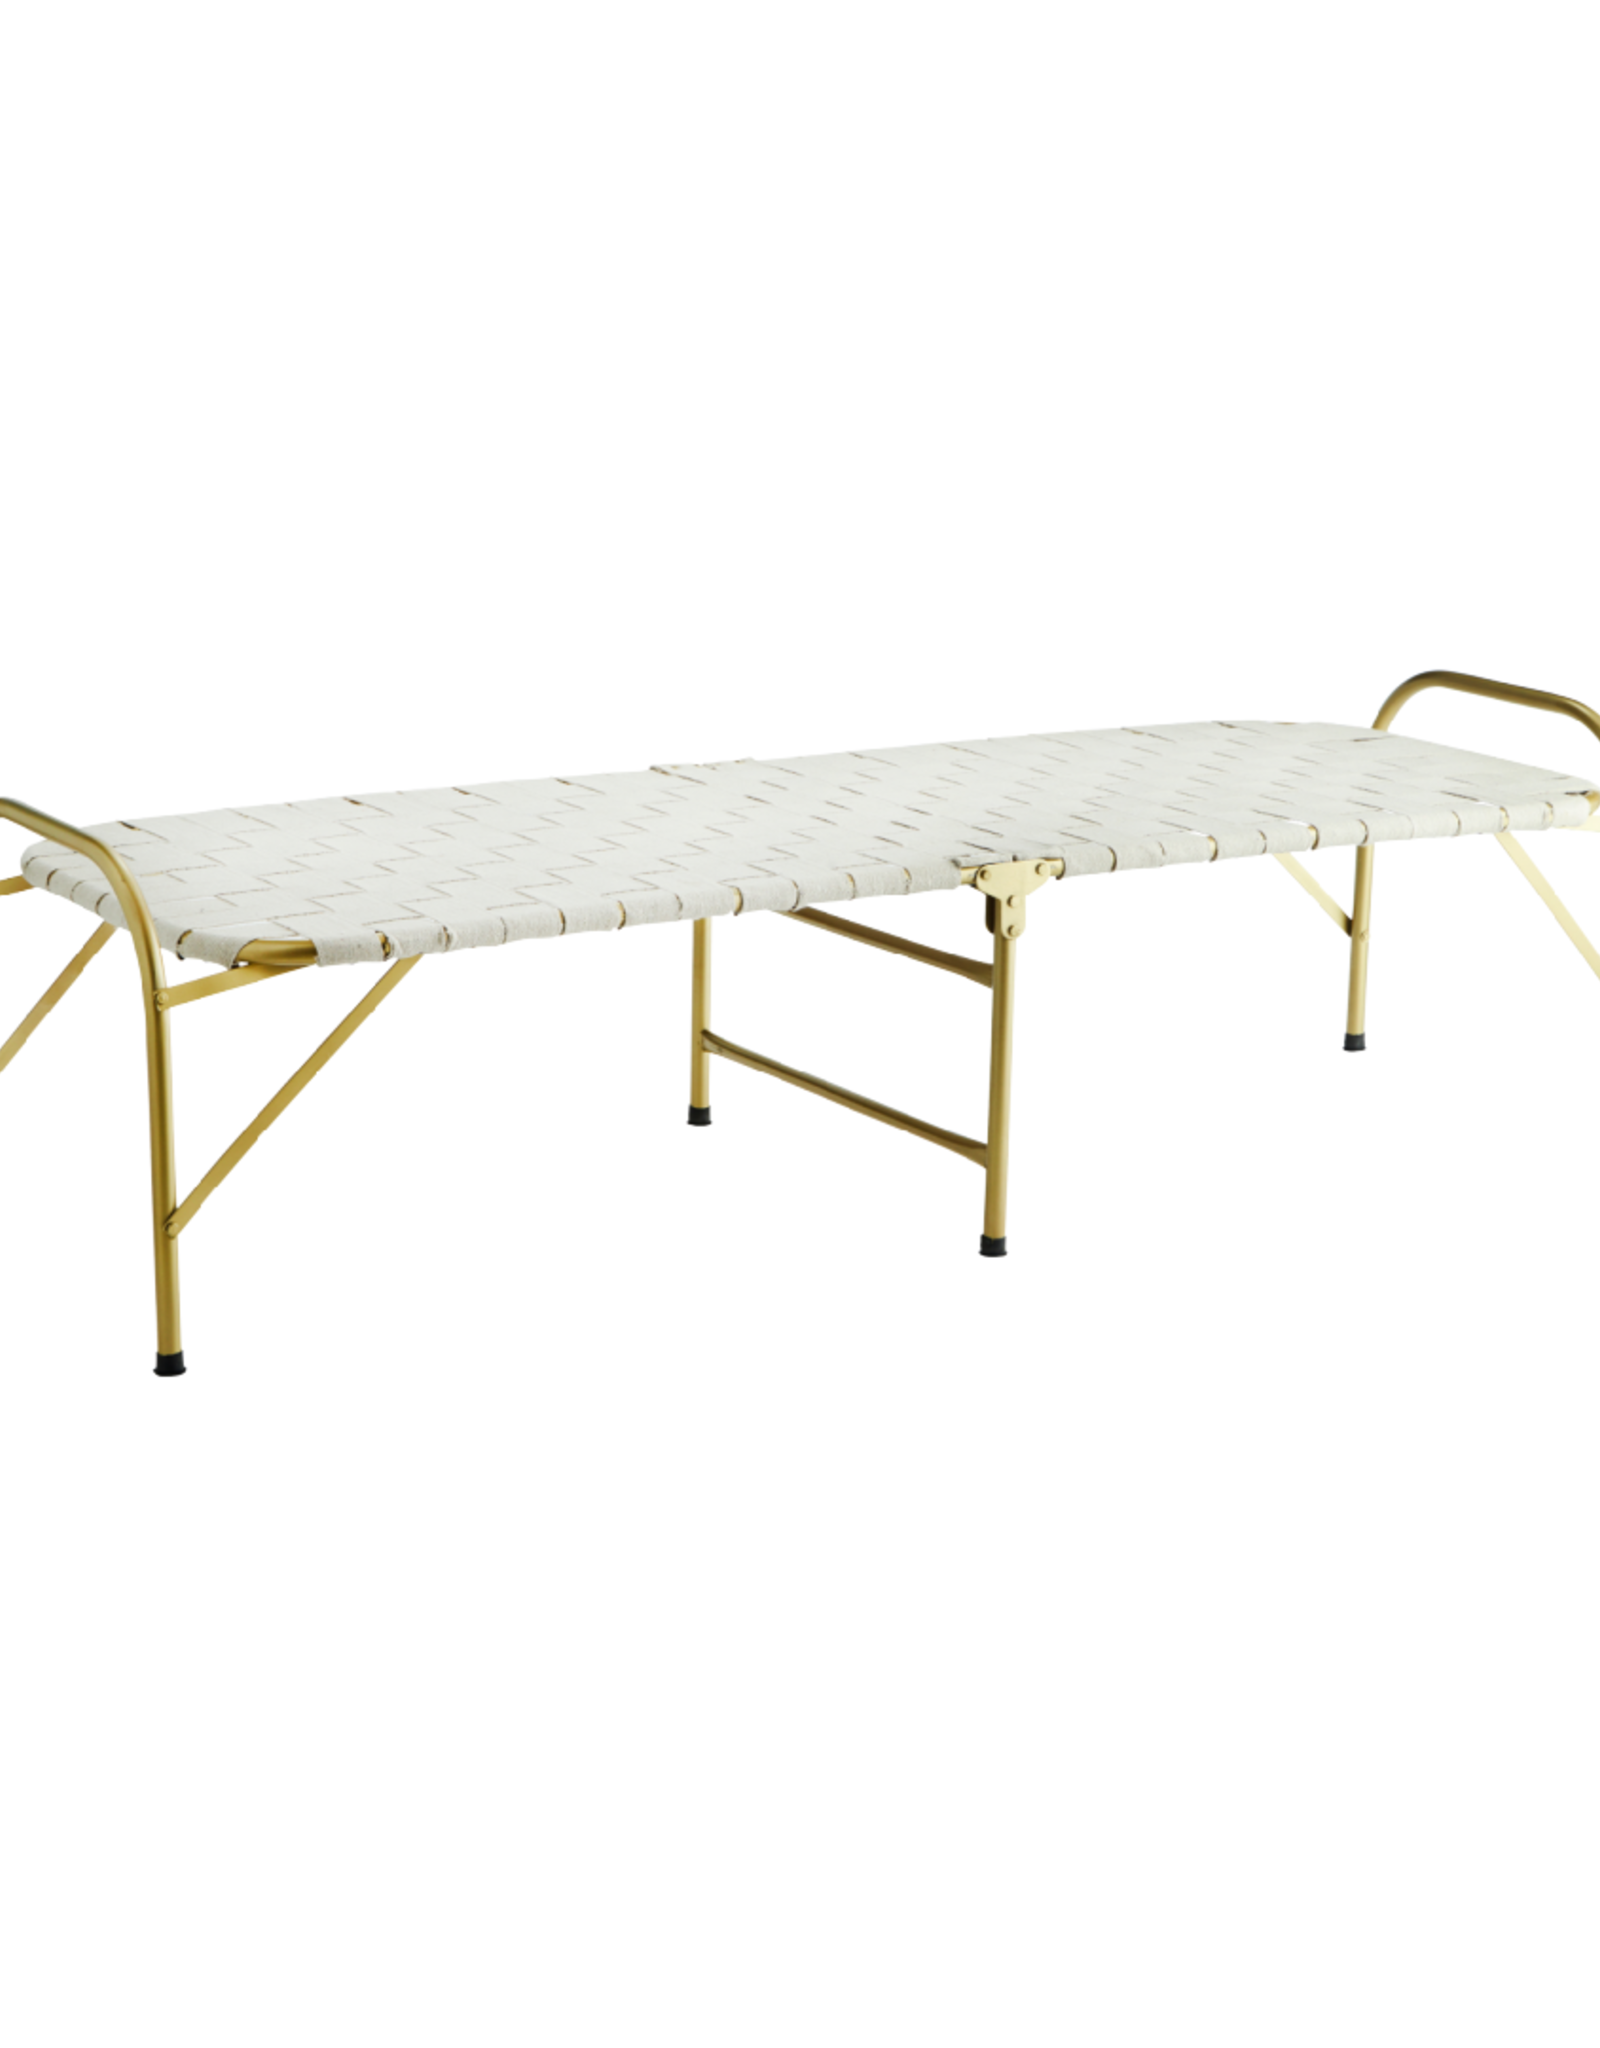 Madam Stoltz foldable daybed 'Daybed' - brass